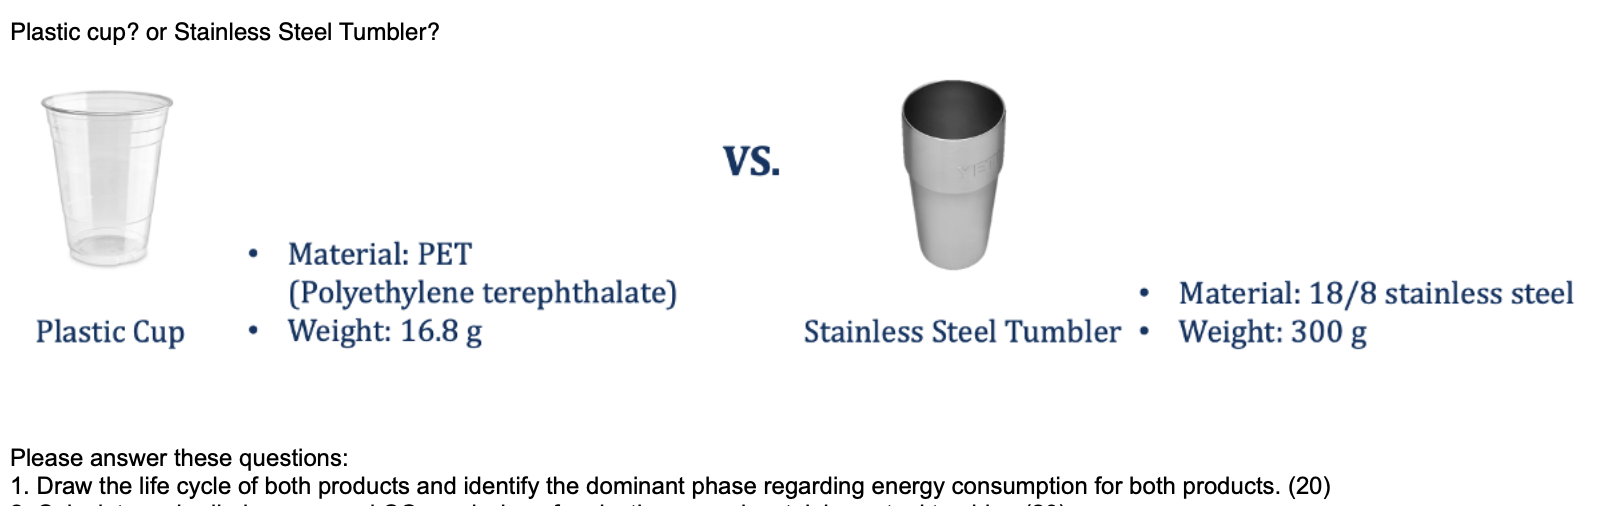 Plastic cup? or Stainless Steel Tumbler? VS. 